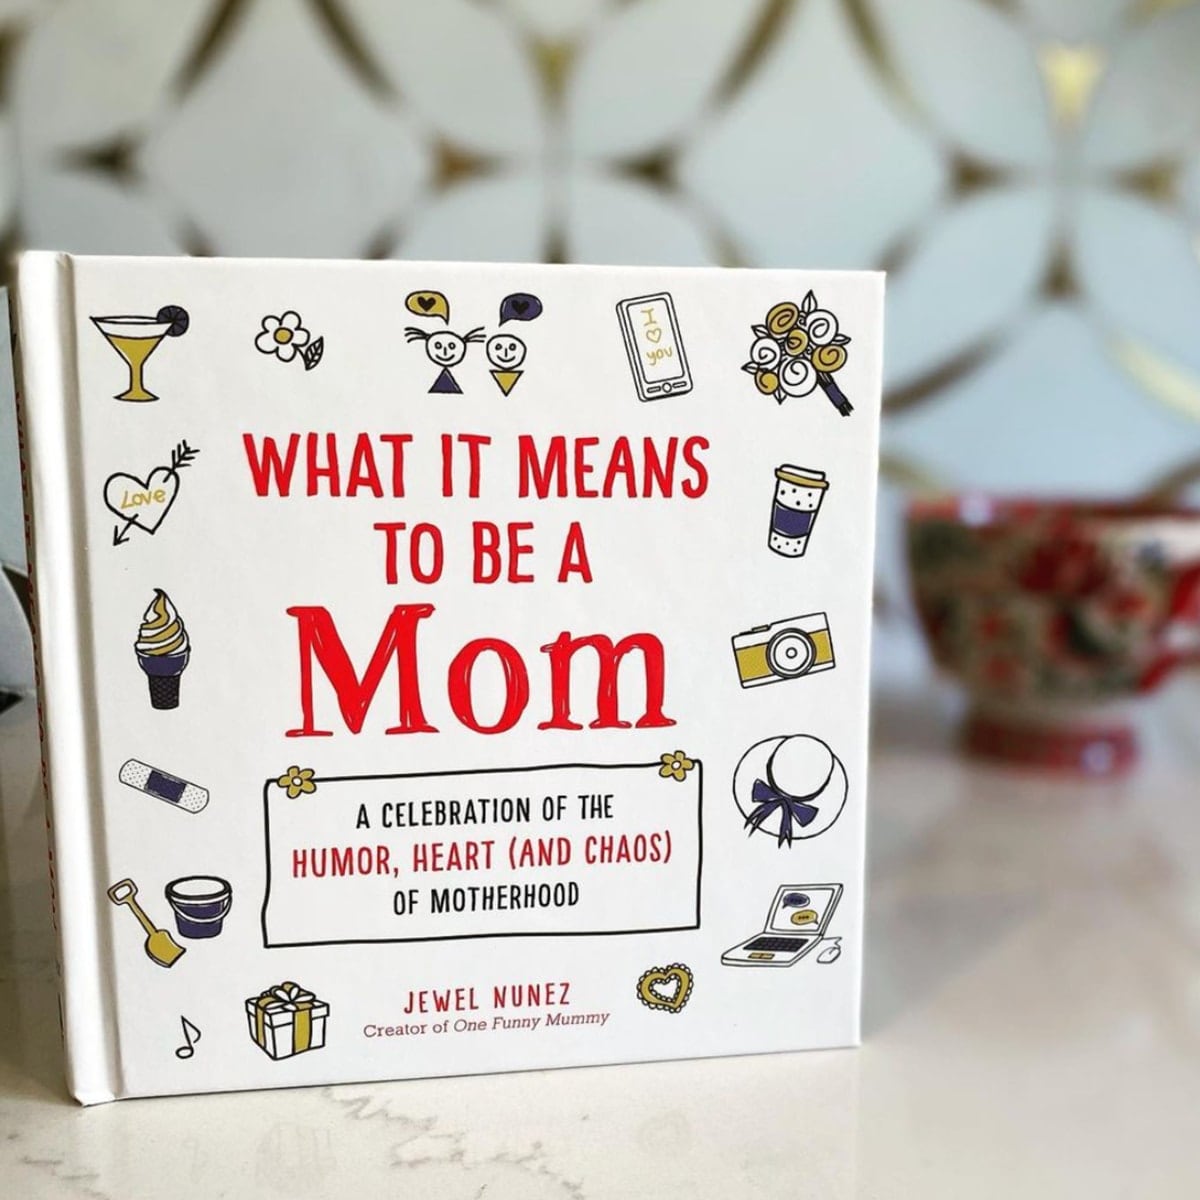 What It Means to Be a Mom By Jewel Nunez